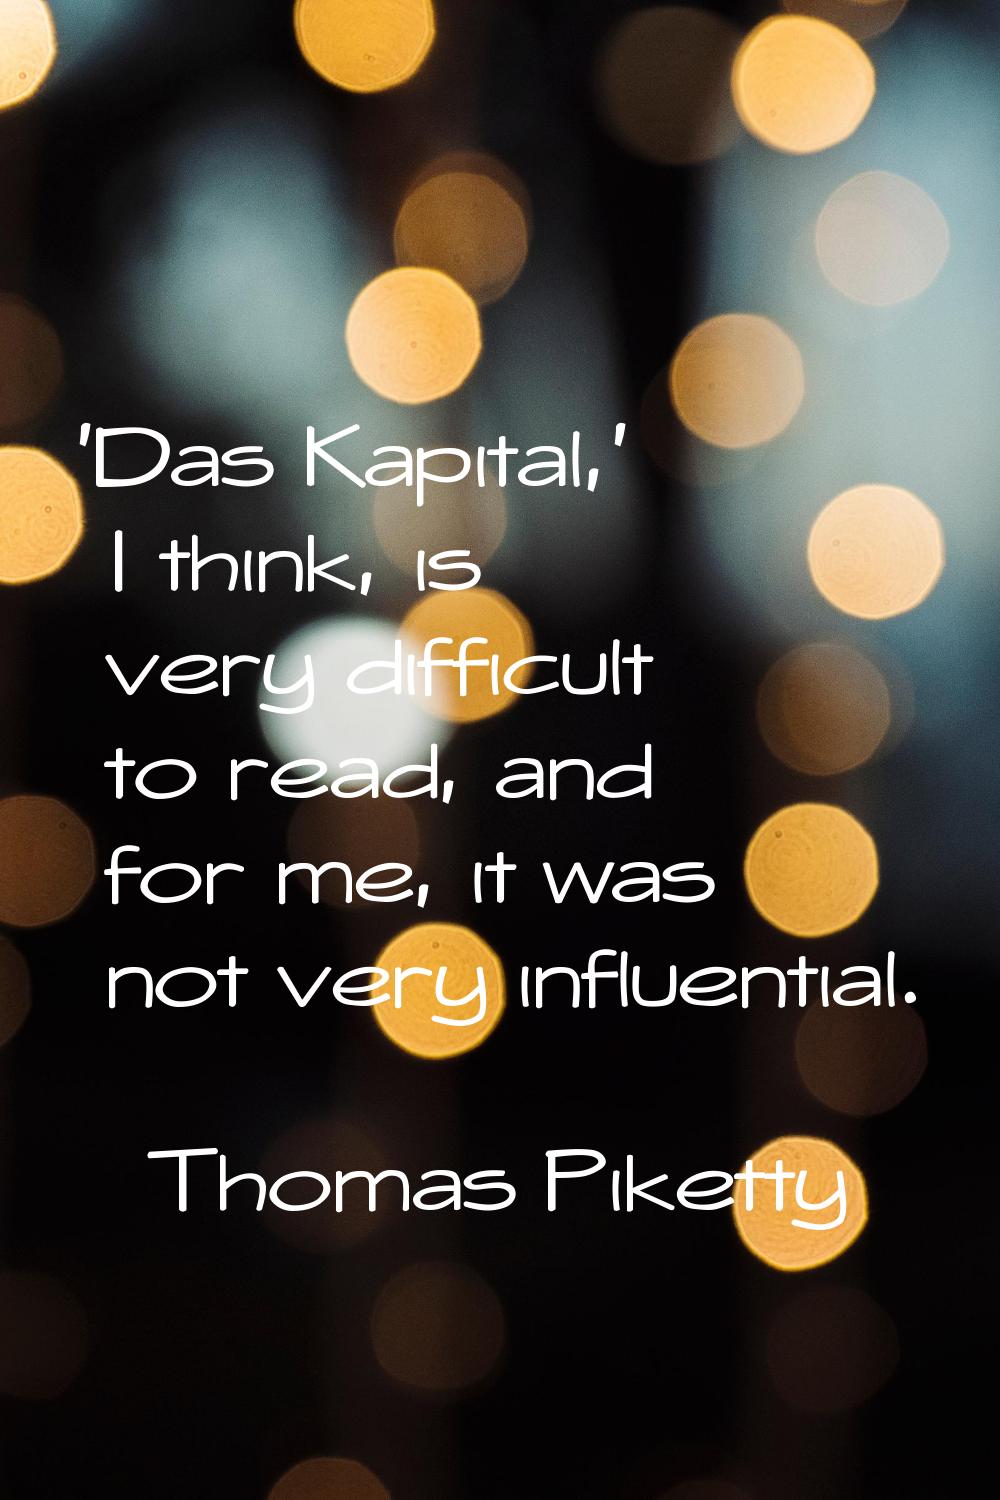 'Das Kapital,' I think, is very difficult to read, and for me, it was not very influential.